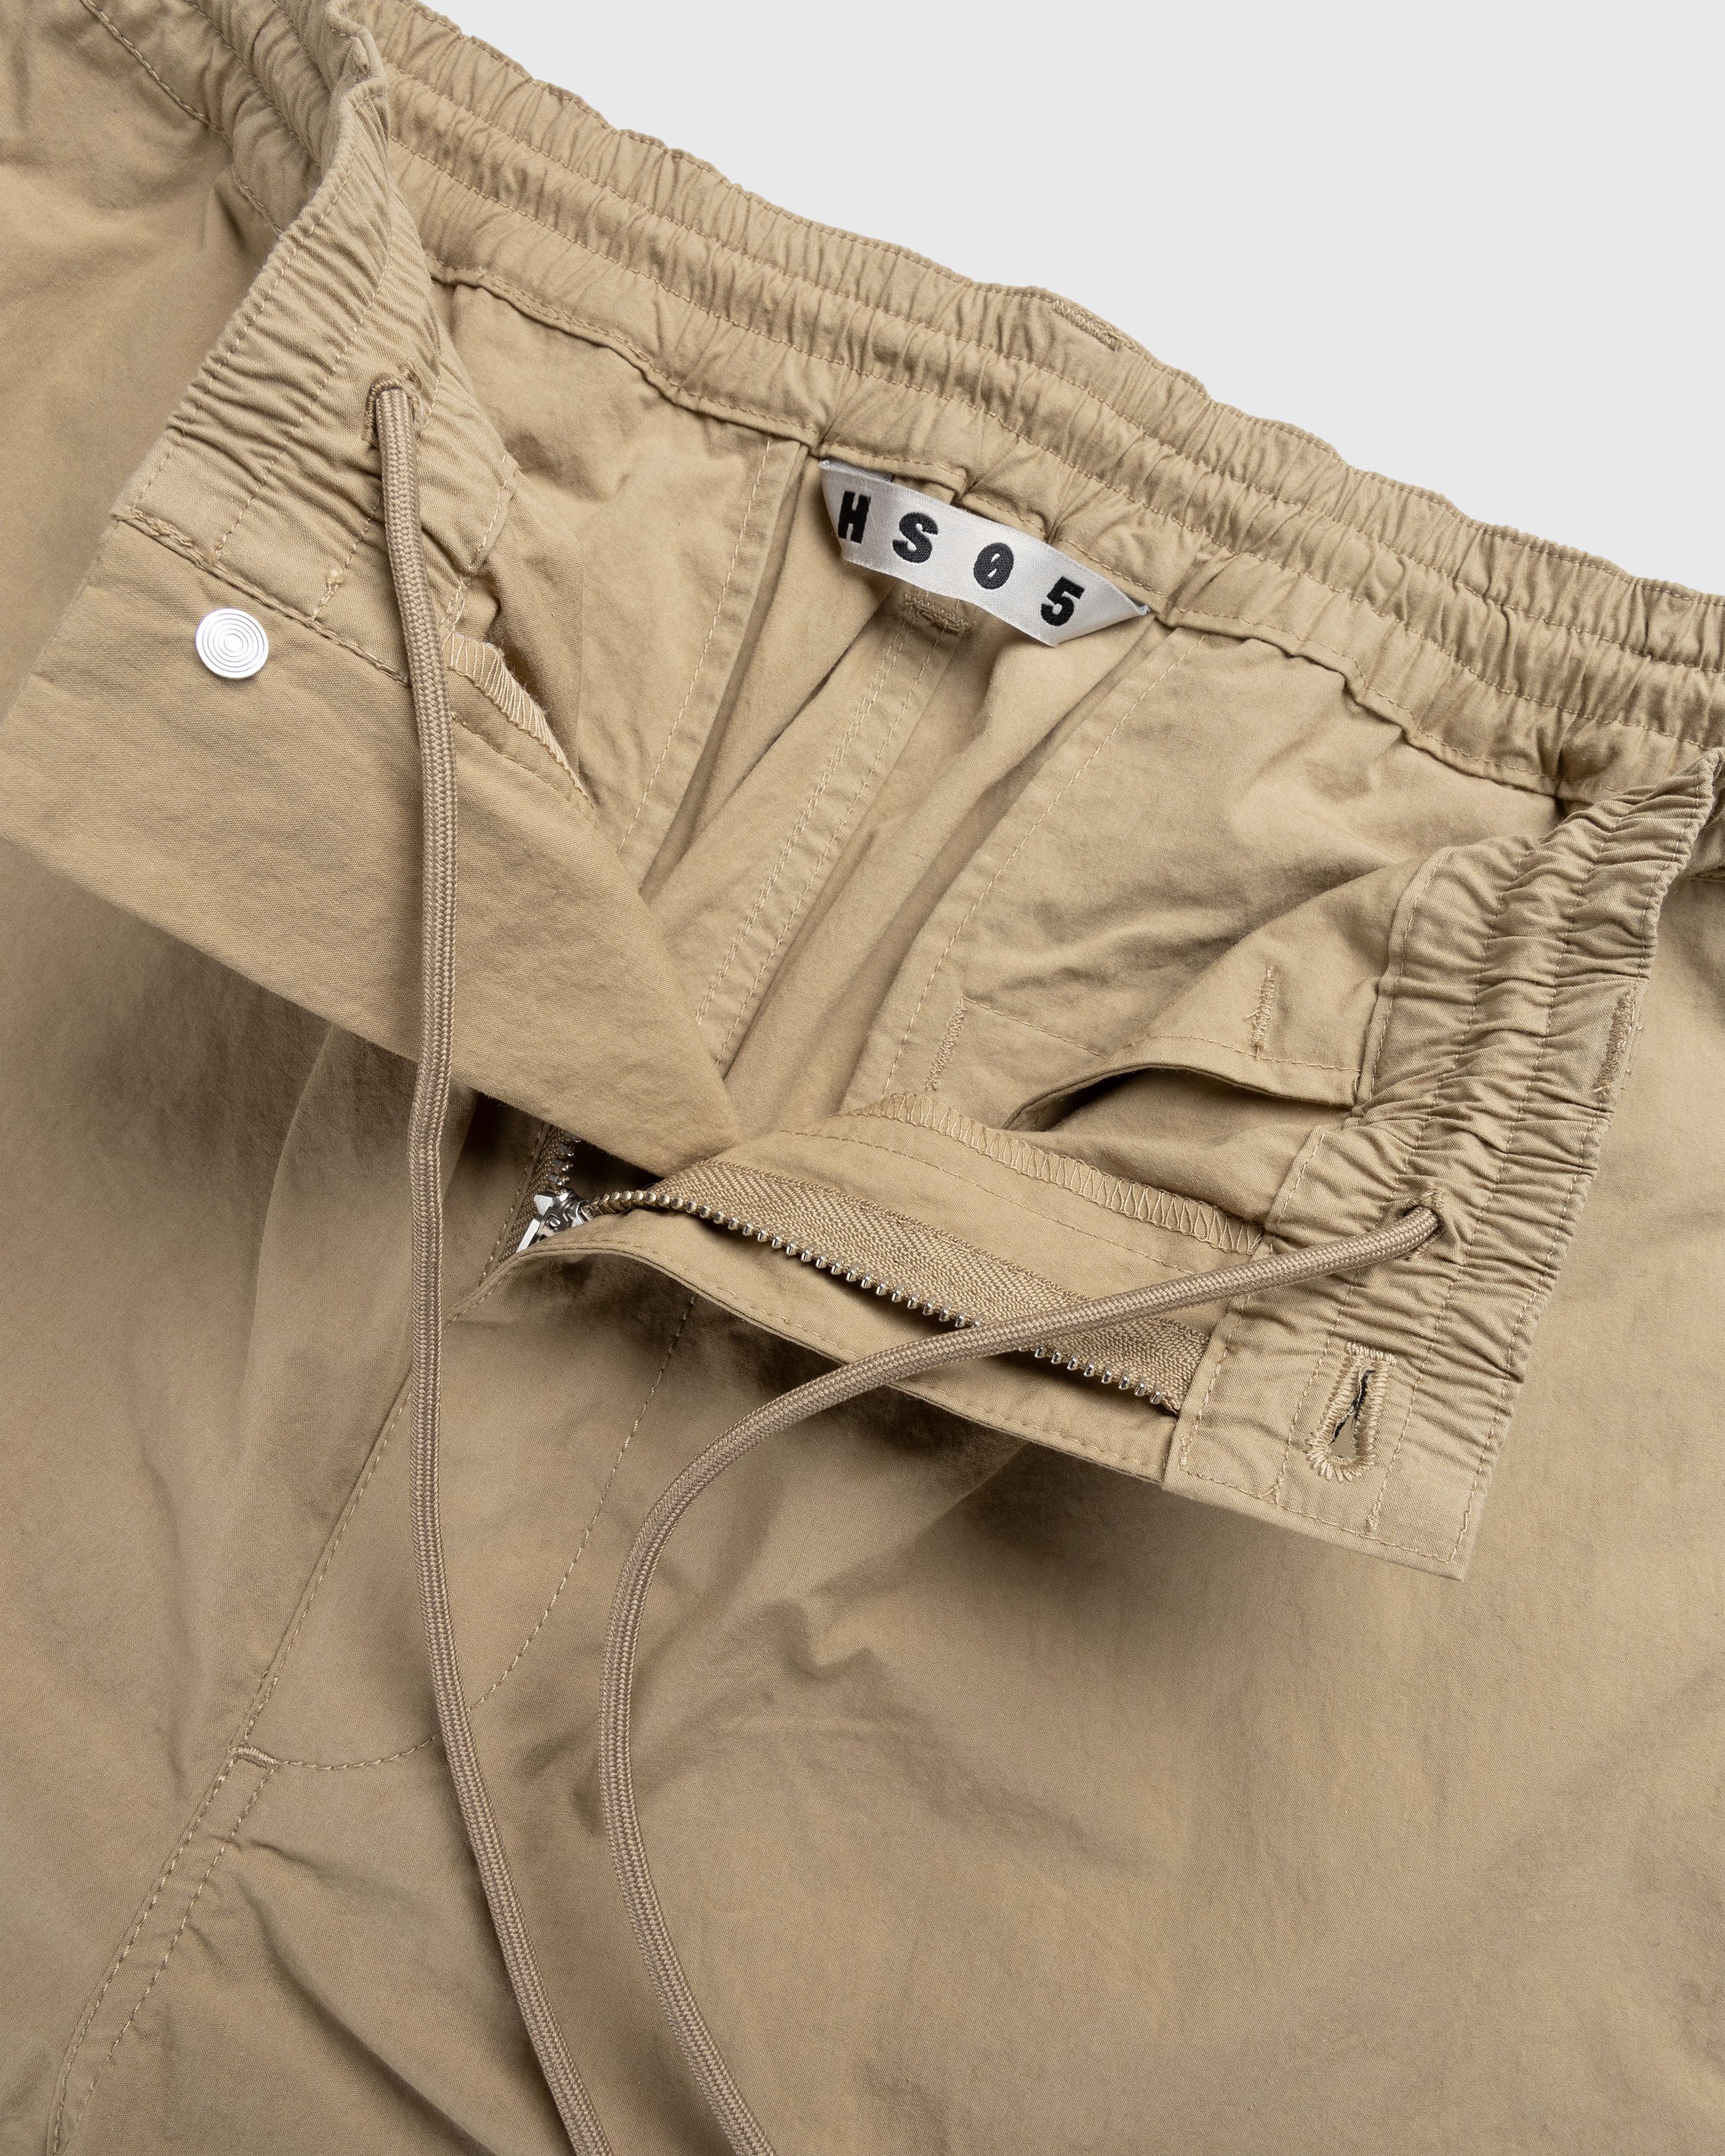 Highsnobiety HS05 - Reverse Piping Elastic Trouser Beige - Clothing - Beige - Image 6